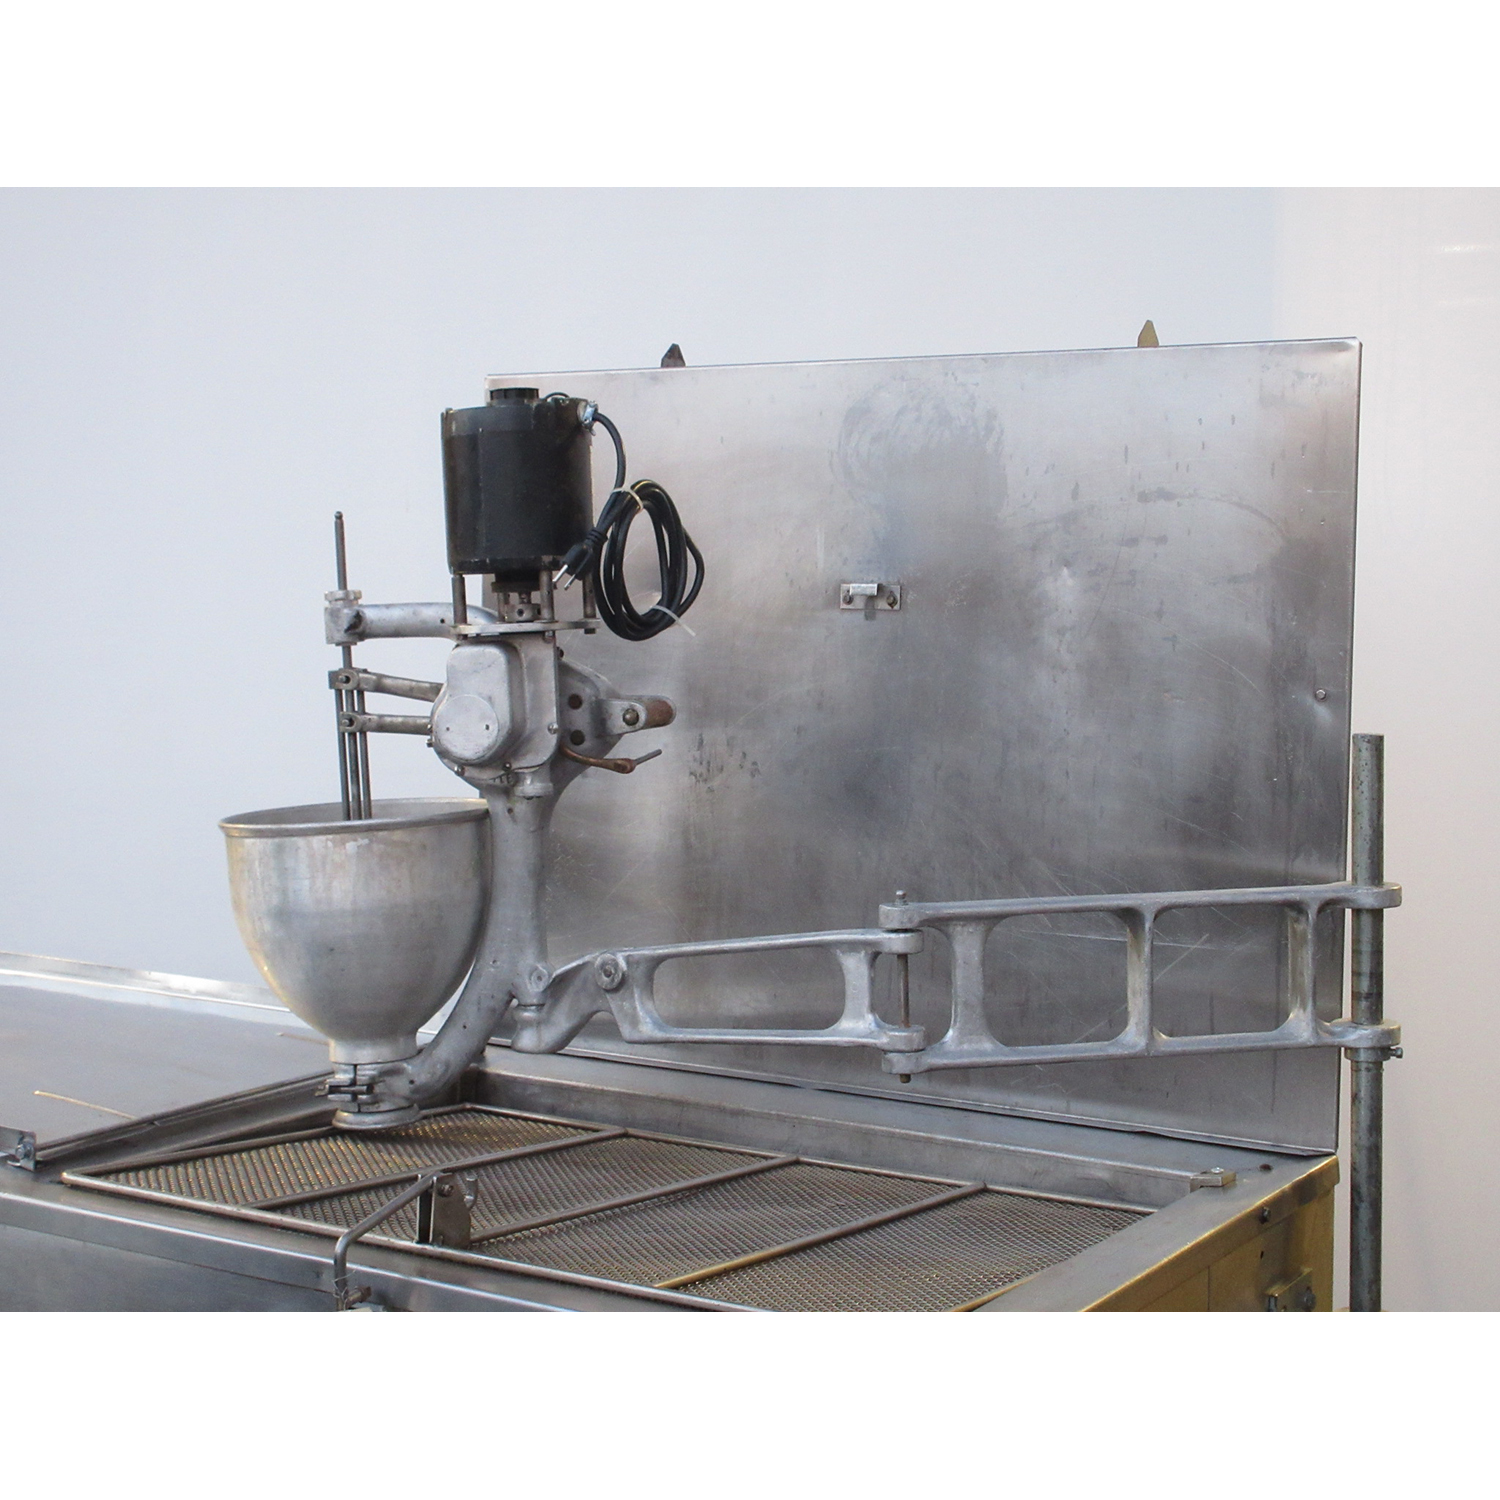 Belshaw 734CG 34" Donut Fryer, Gas, Used Excellent Condition image 1